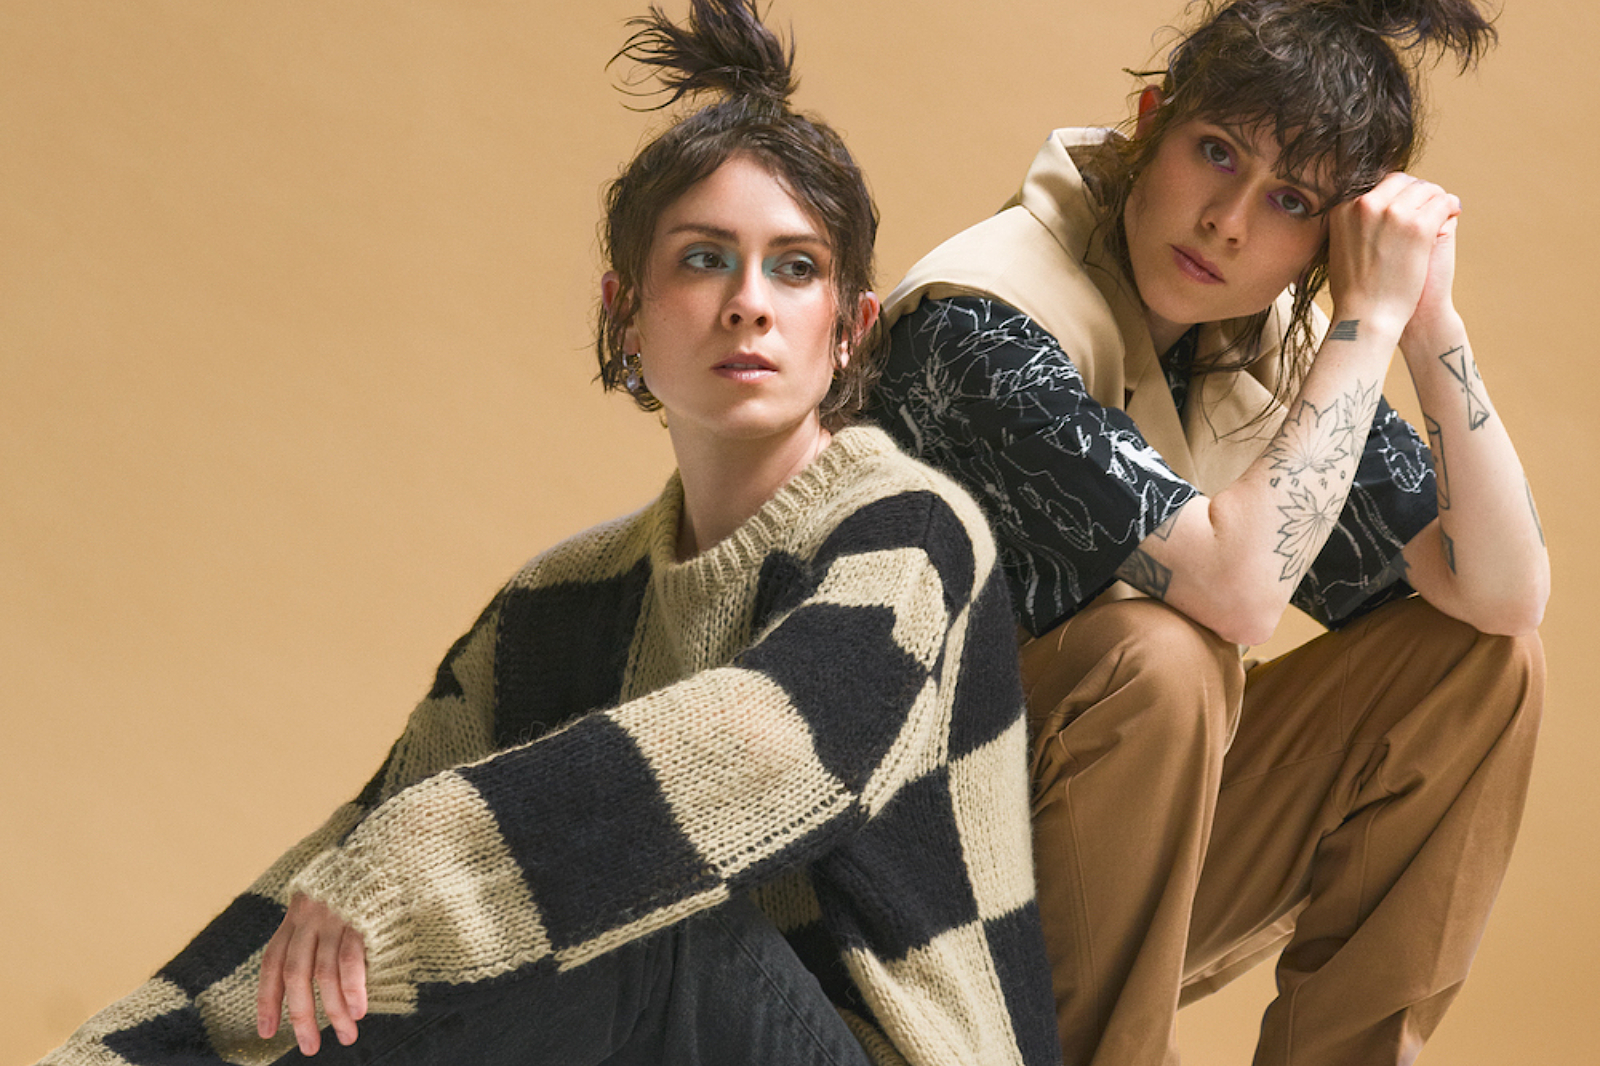 Tegan and Sara release new track 'I Can't Grow Up'